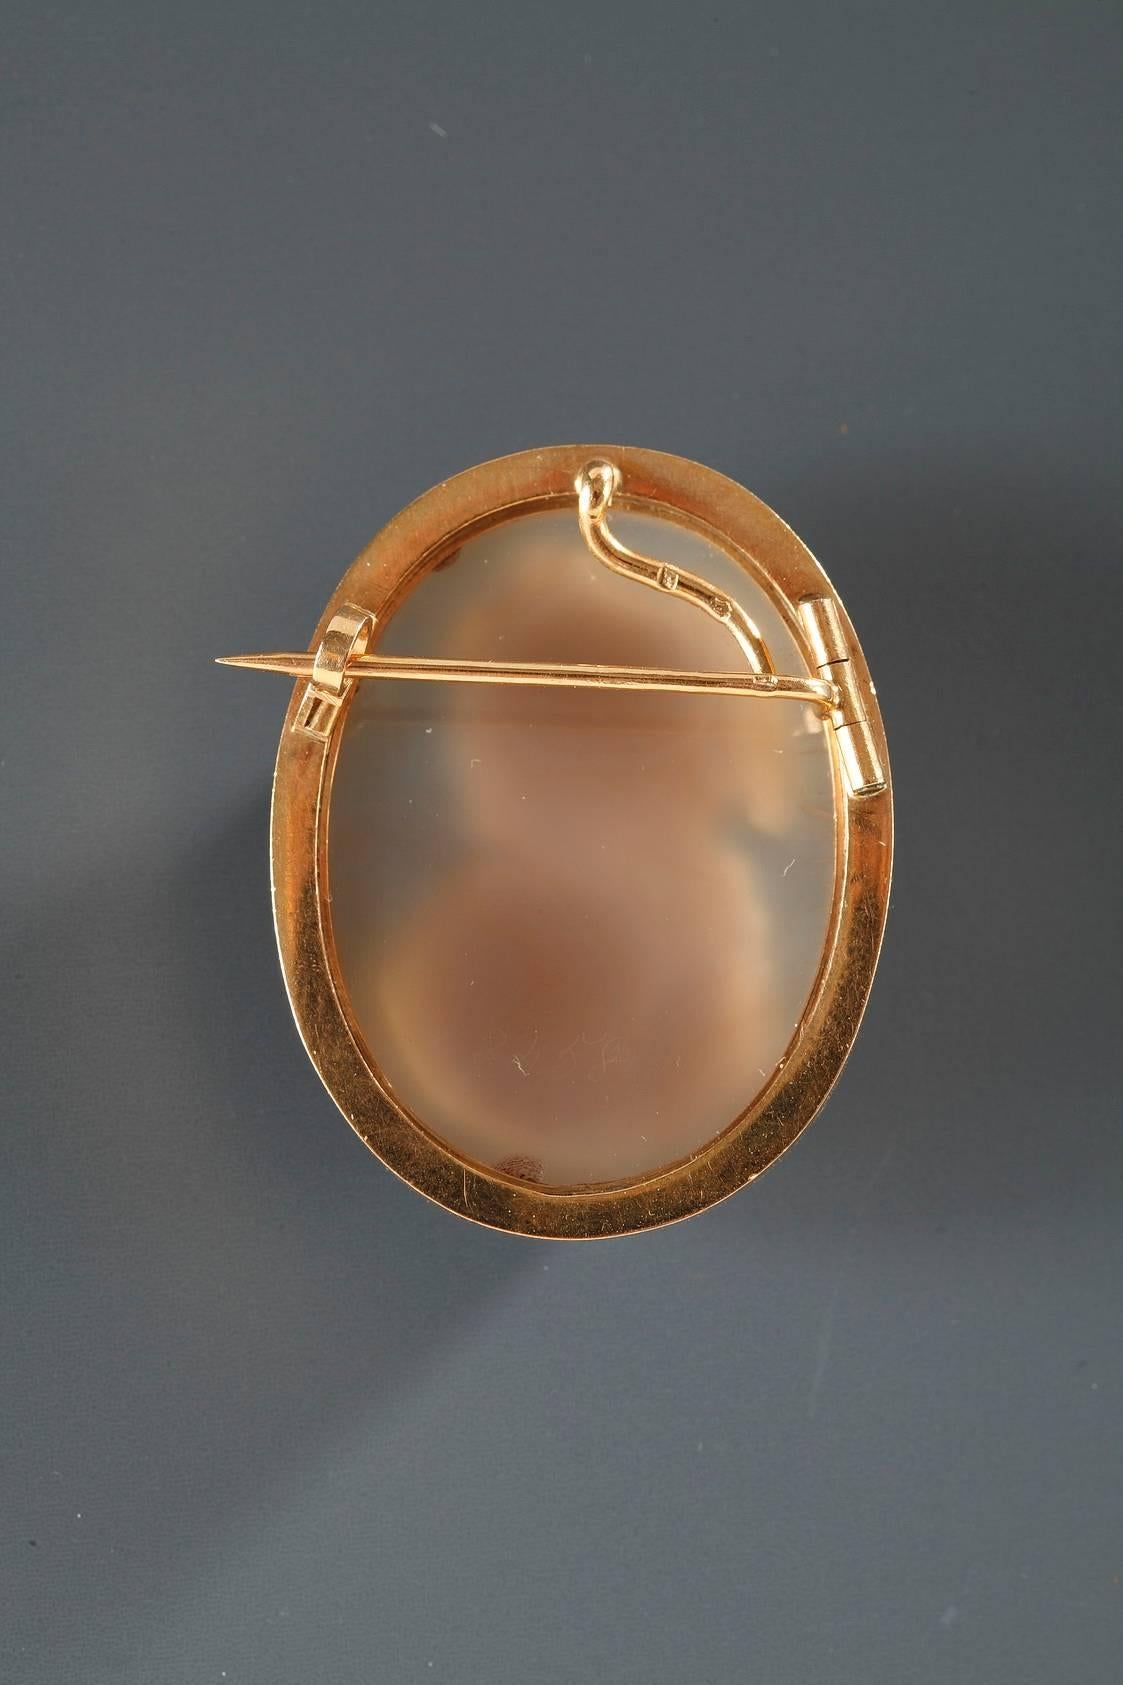 Gold brooch with a shell cameo featuring the bust of a young woman wearing ribbons in her hair. The necklace and earrings she is wearing have a star motif on them. 19th century work.
 
Circa : 1850

Dim: L: 1 in, W: 0.4 in, H: 1.6 in
Dim: L: 3